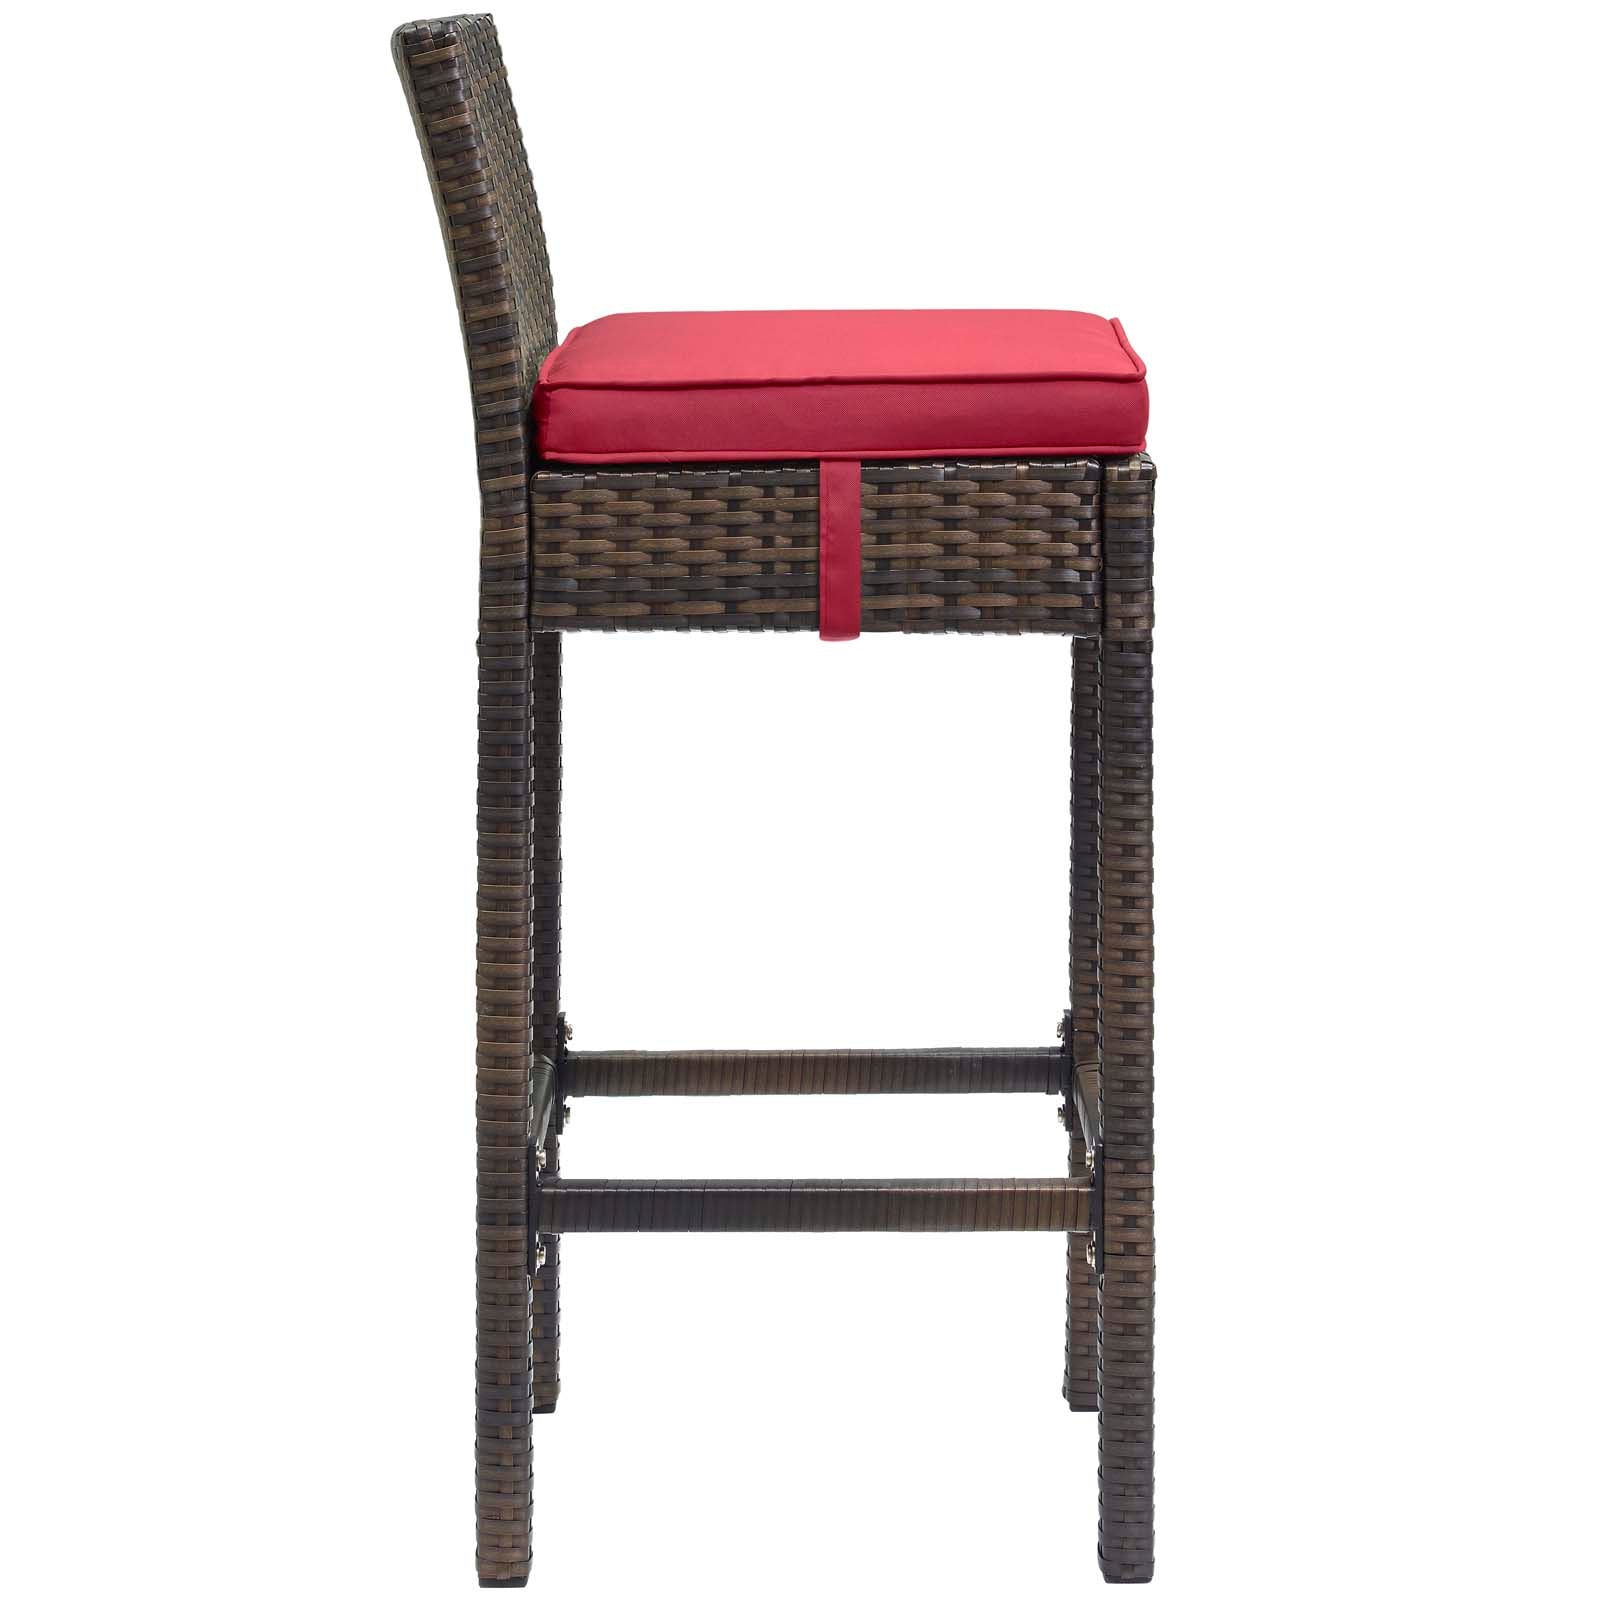 Modway Outdoor Barstools - Conduit Bar Stool Outdoor Patio Wicker Rattan Set of 4 Brown Red